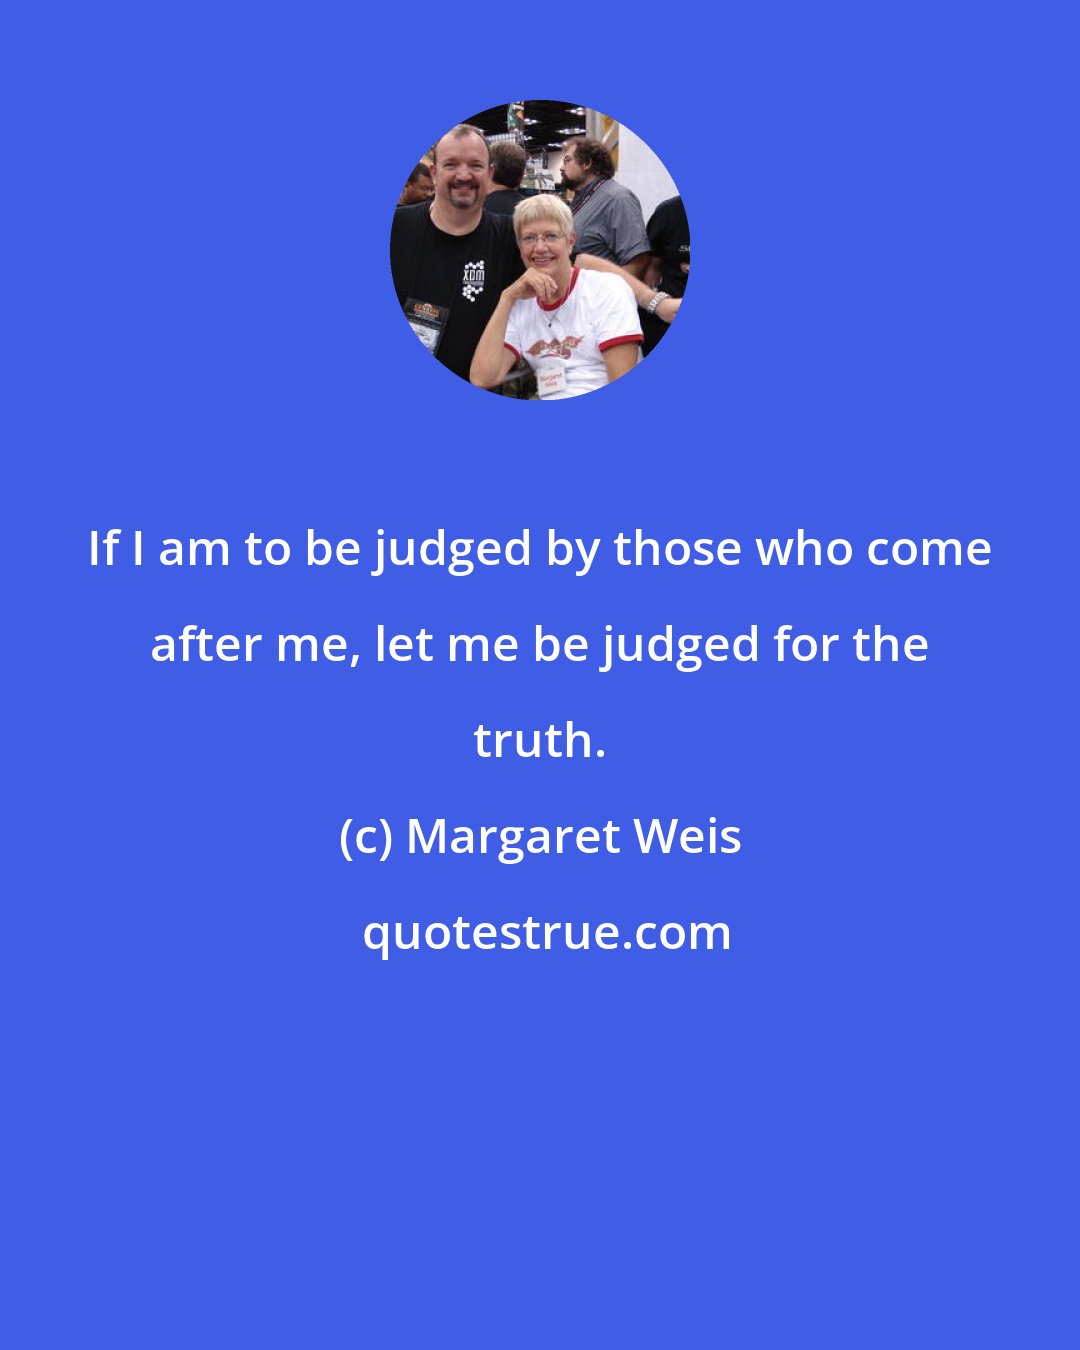 Margaret Weis: If I am to be judged by those who come after me, let me be judged for the truth.